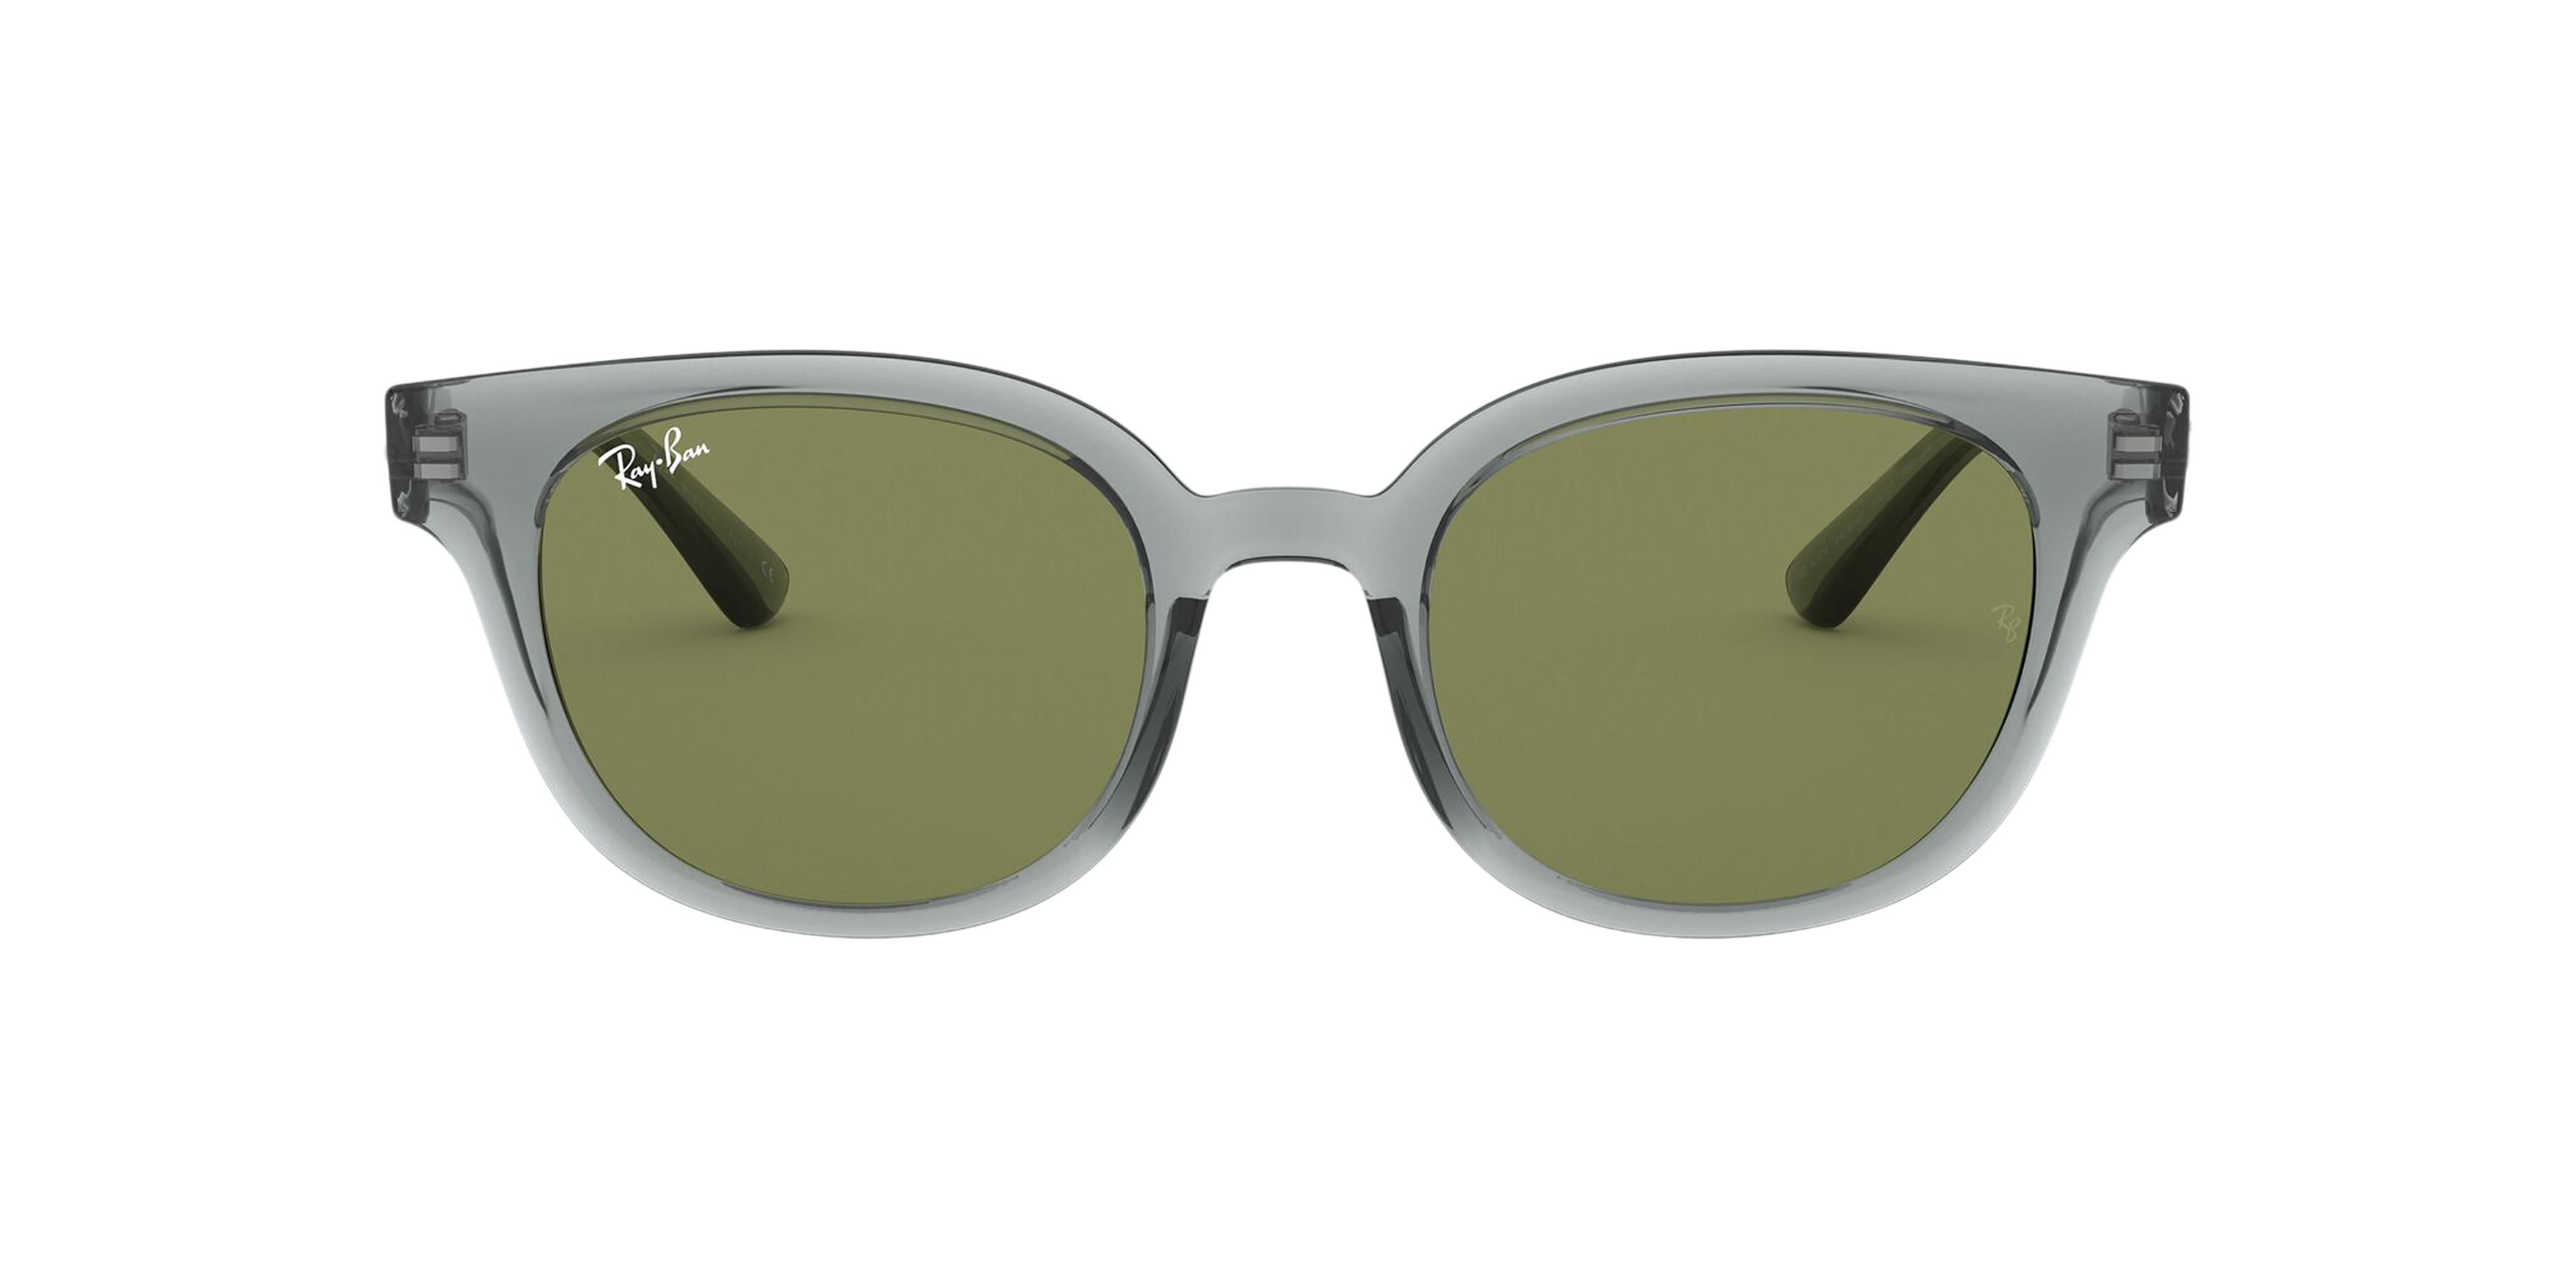 [products.image.front] Ray-Ban RB4324 64504E